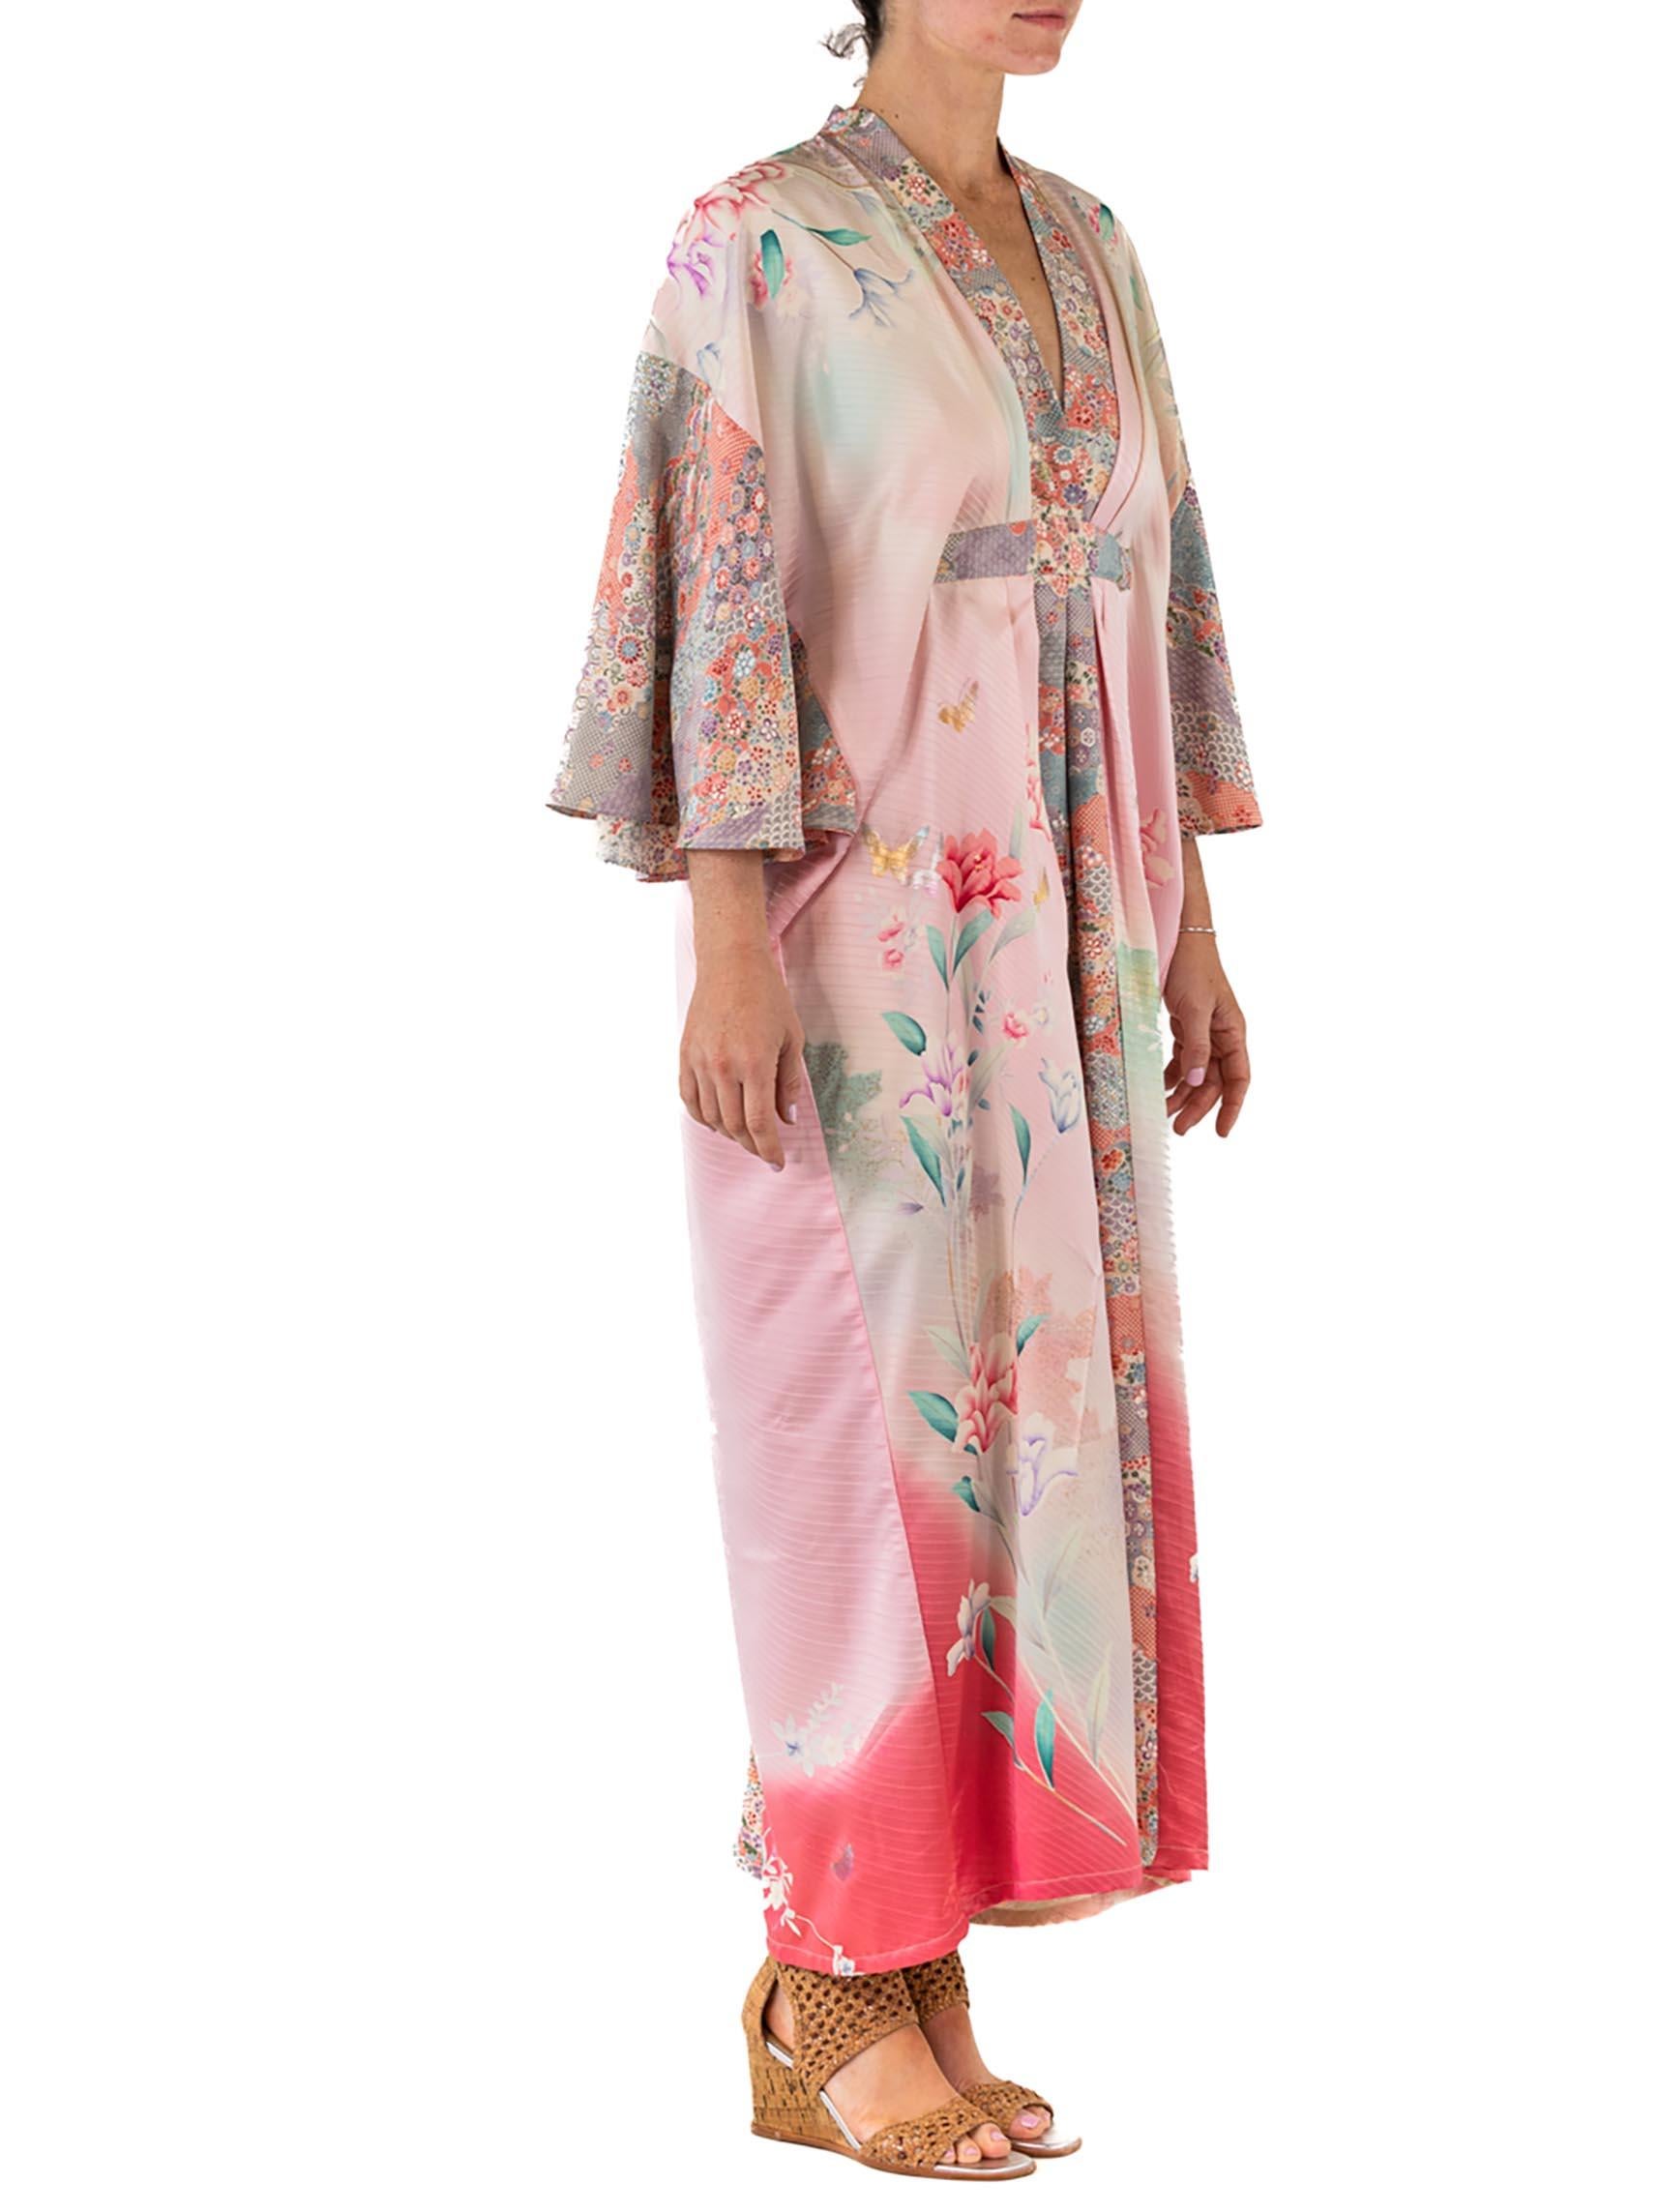 MORPHEW COLLECTION Mixed Pastels Floral Print Japanese Kimono Silk Pleate Kaftan In New Condition For Sale In New York, NY